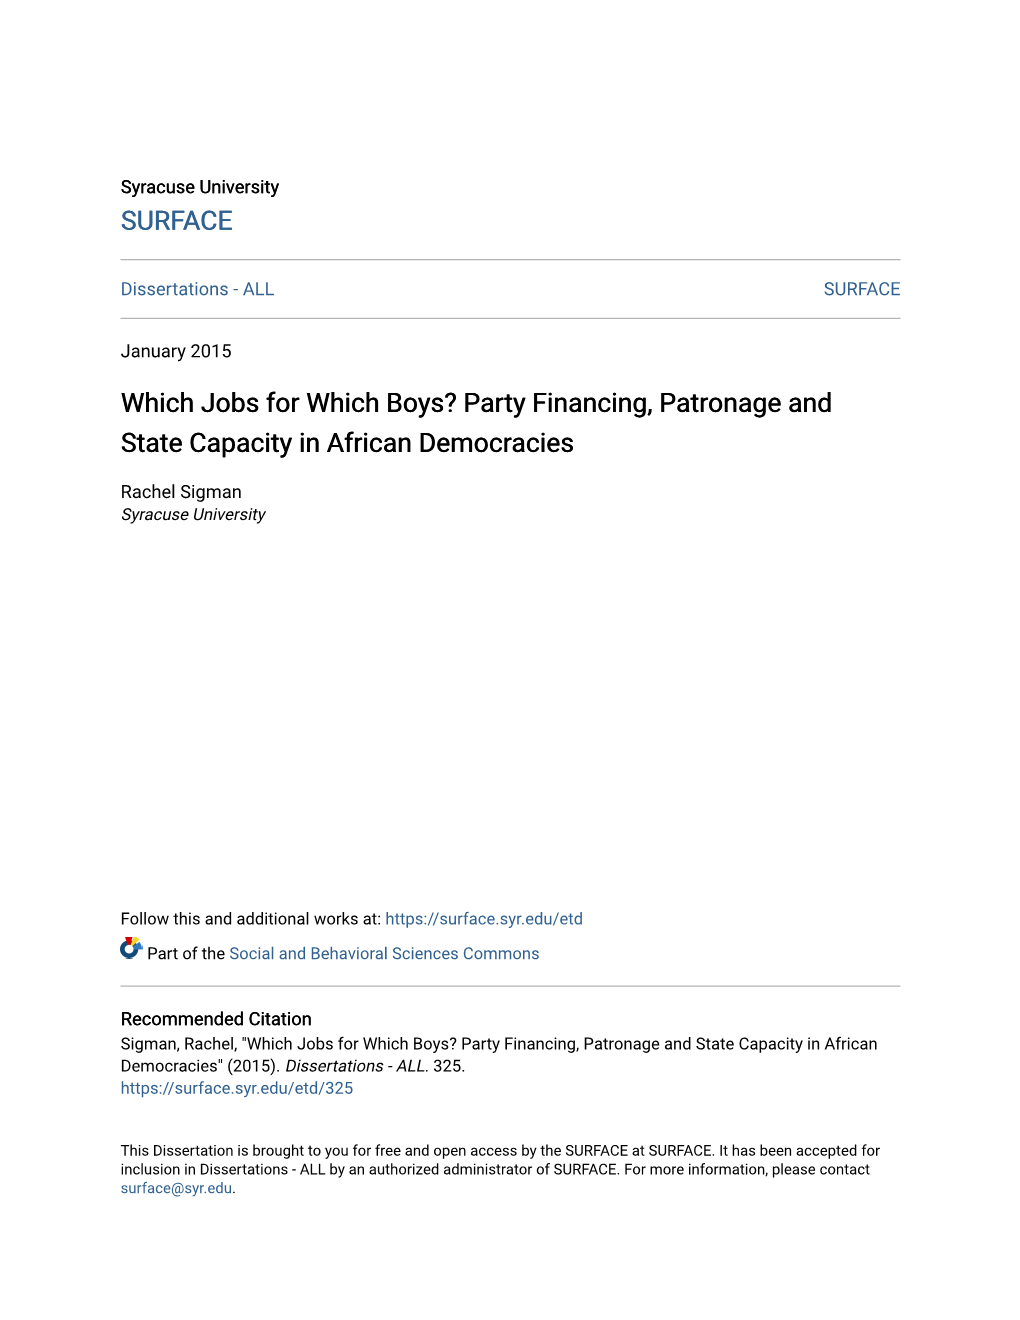 Which Jobs for Which Boys? Party Financing, Patronage and State Capacity in African Democracies